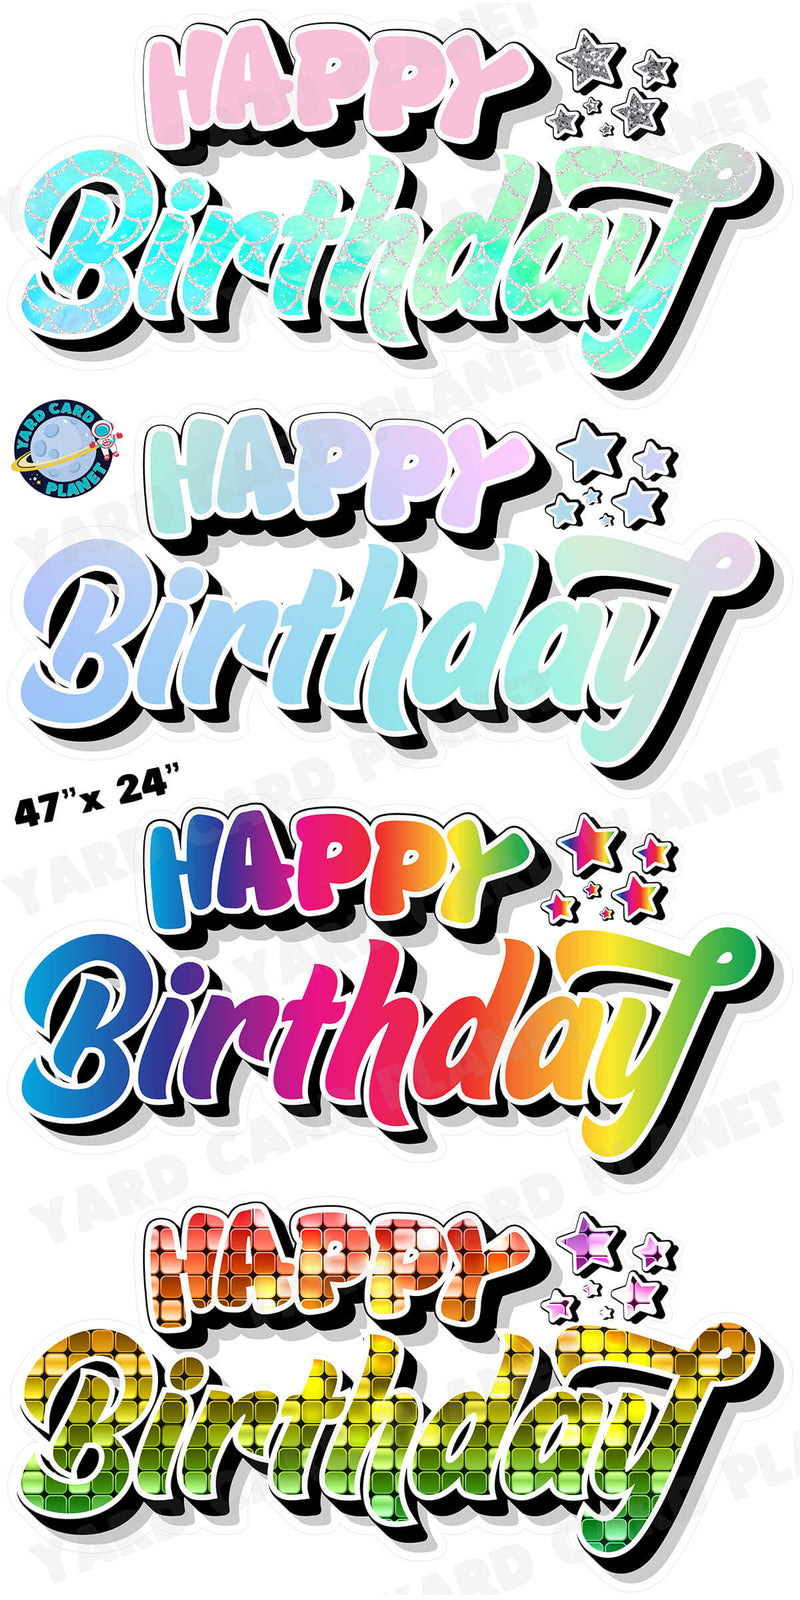 Happy Birthday EZ Quick Signs in Bright and Pastel Rainbow Patterns Yard Card Set